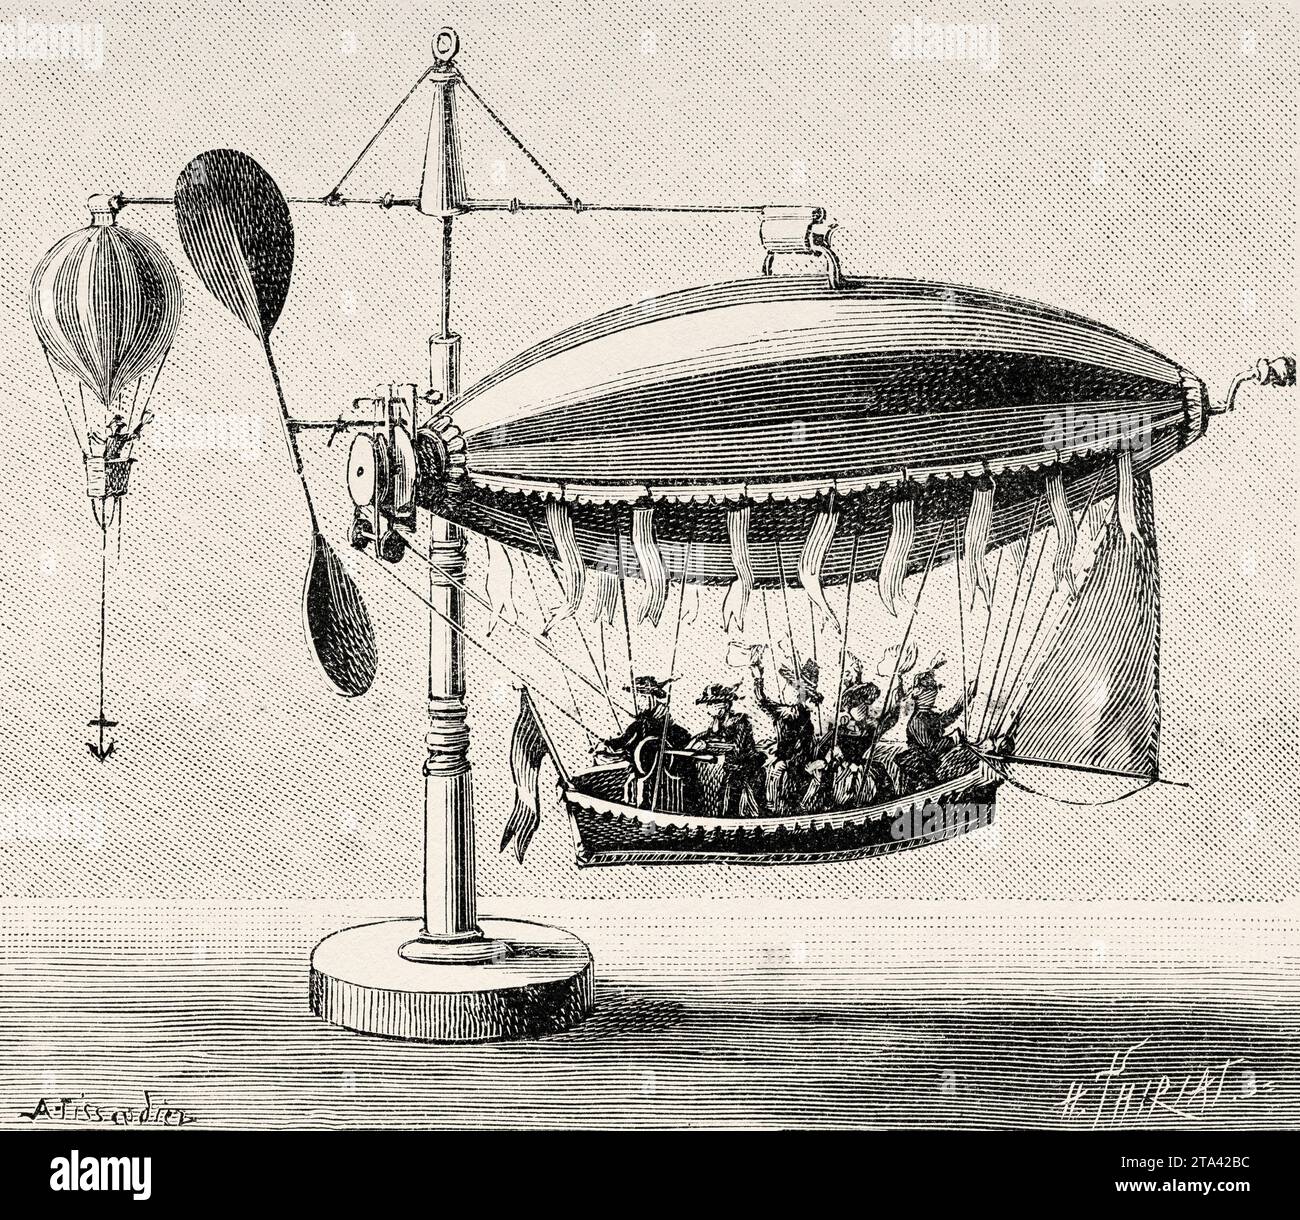 Dirigible aerostat toy assembled in a tivivo. Old illustration from La Nature 1887 Stock Photo